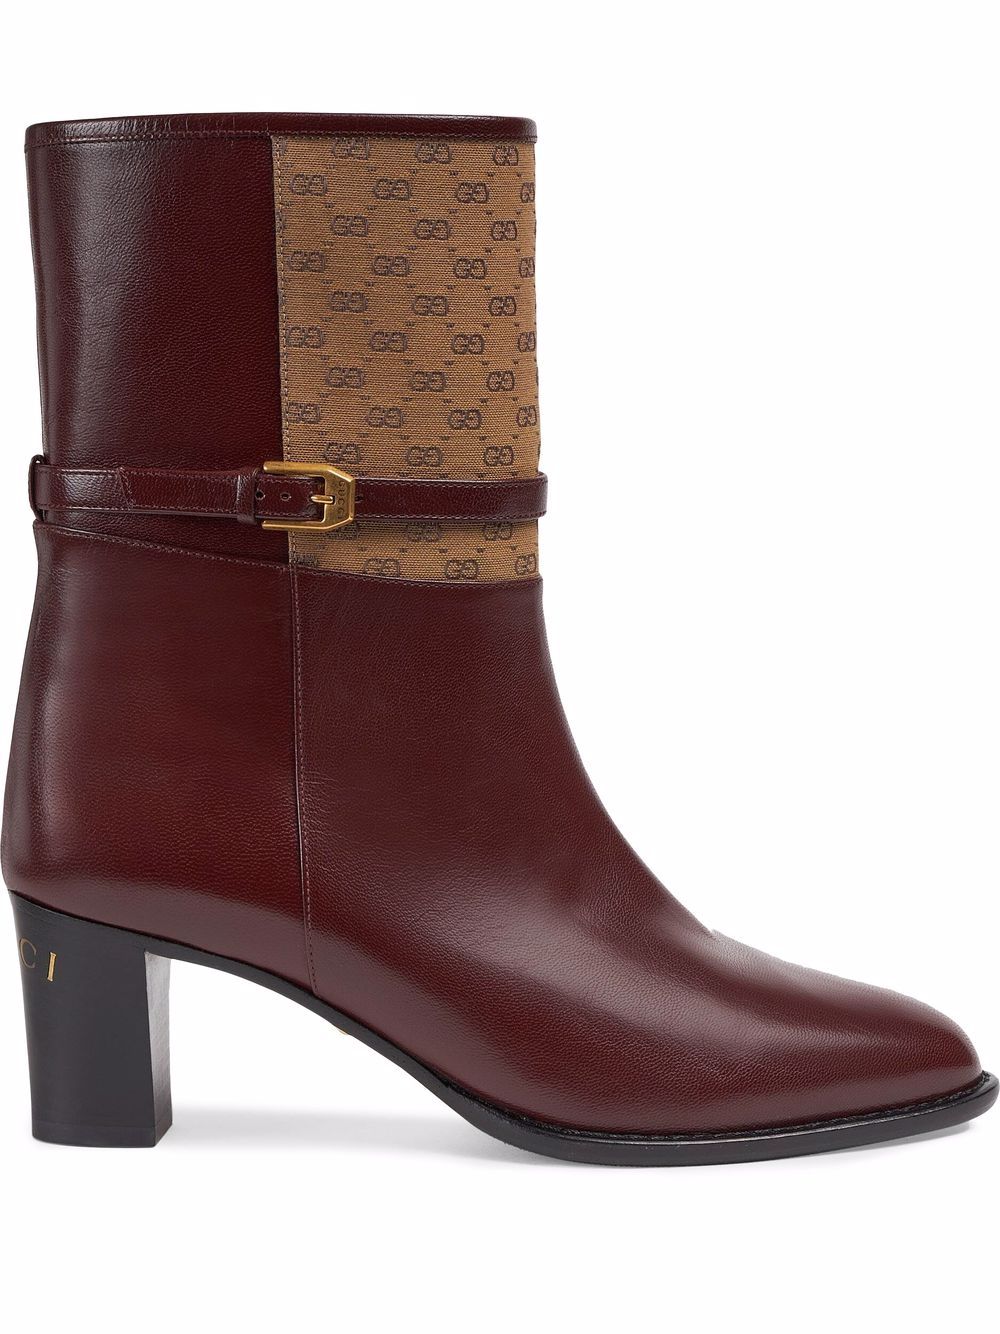 Gucci GG leather boots - Red von Gucci